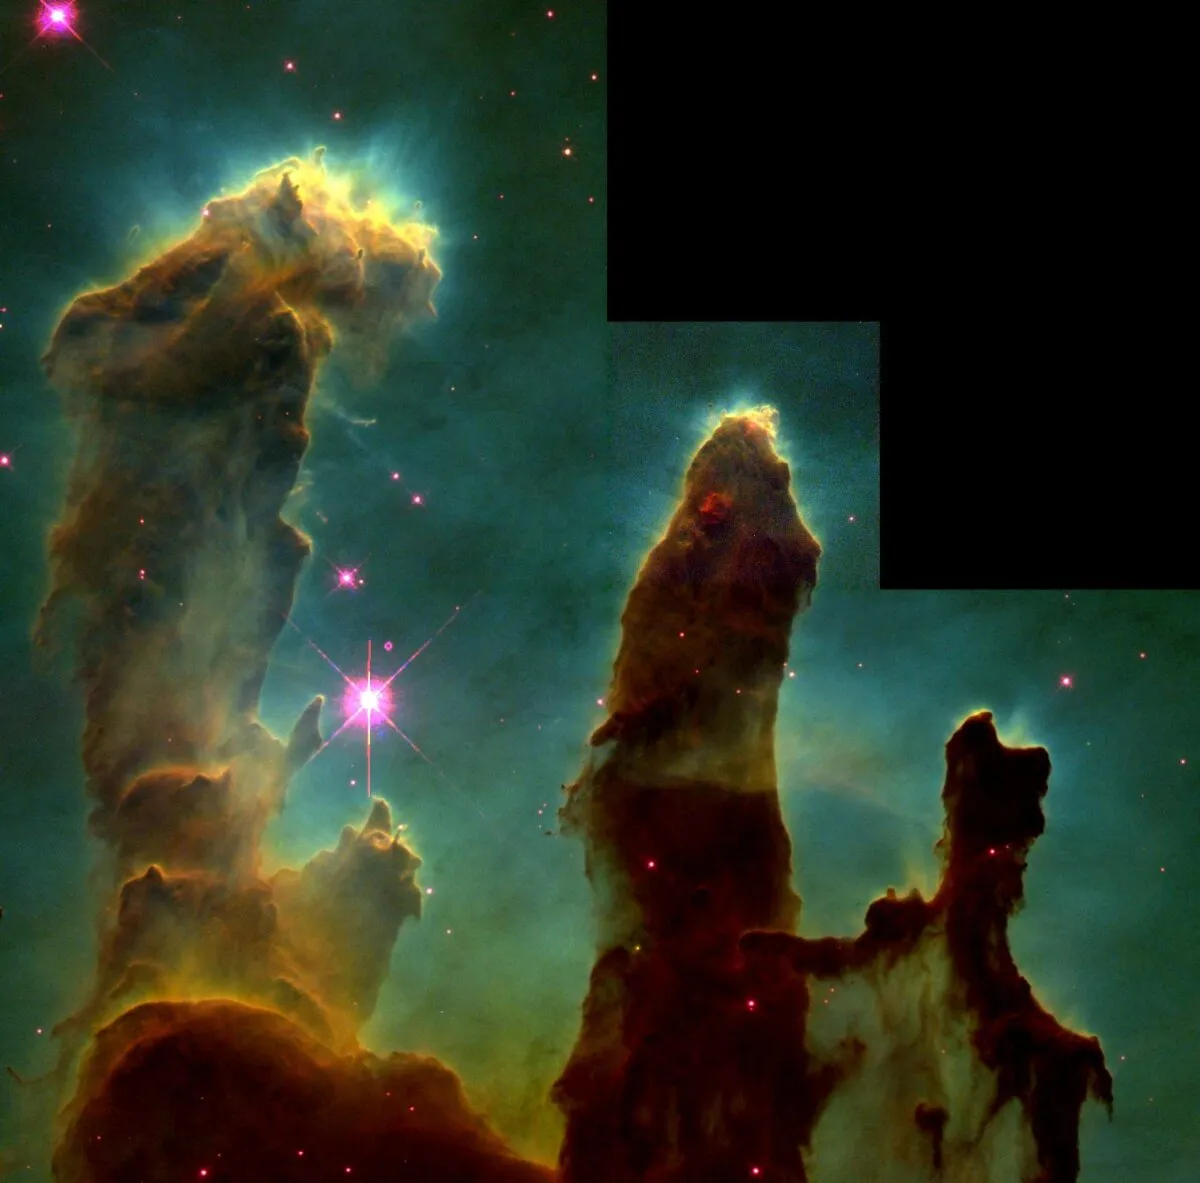 Perhaps the most famous image of cosmic dust of all time? Hubble's 1995 image the 'Pillars of Creation'. Credit: NASA, ESA, STScI, J. Hester and P. Scowen (Arizona State University)